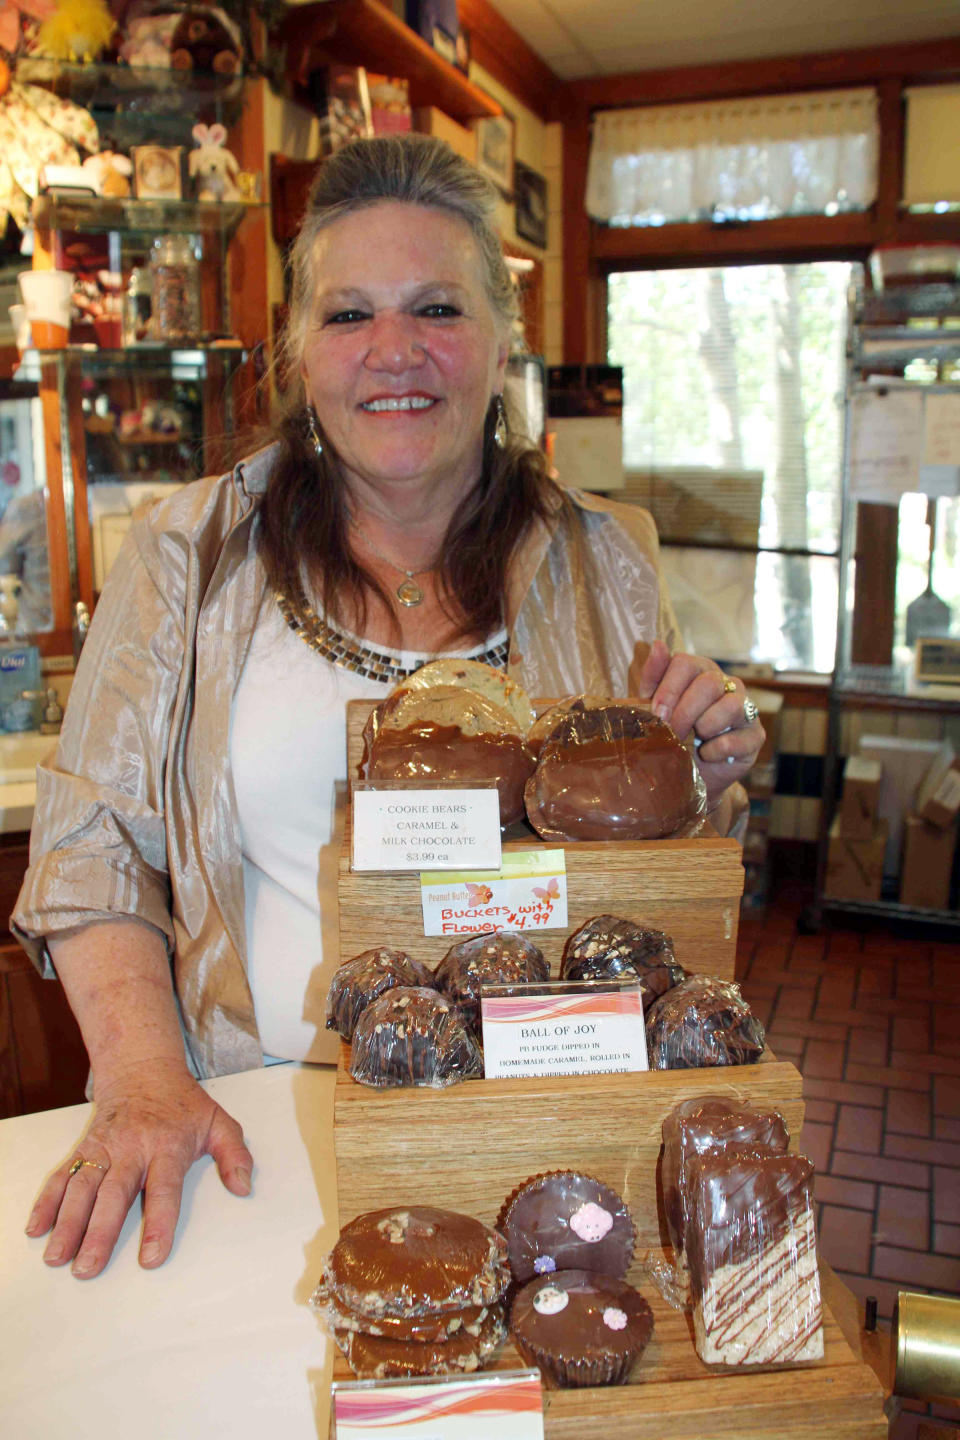 This July 30, 2012 photograph provided by the Estes Park News shows Jo Adams the owner of the Rocky Mountain Chocolate Factory in her store in Estes Park, Colo. A black bear went in and out of the candy store multiple times on July 25, 2012. He used the front door and didn’t break a thing. He did, however, steal some treats. (AP Photo/Estes Park News, Kris Hazelton)